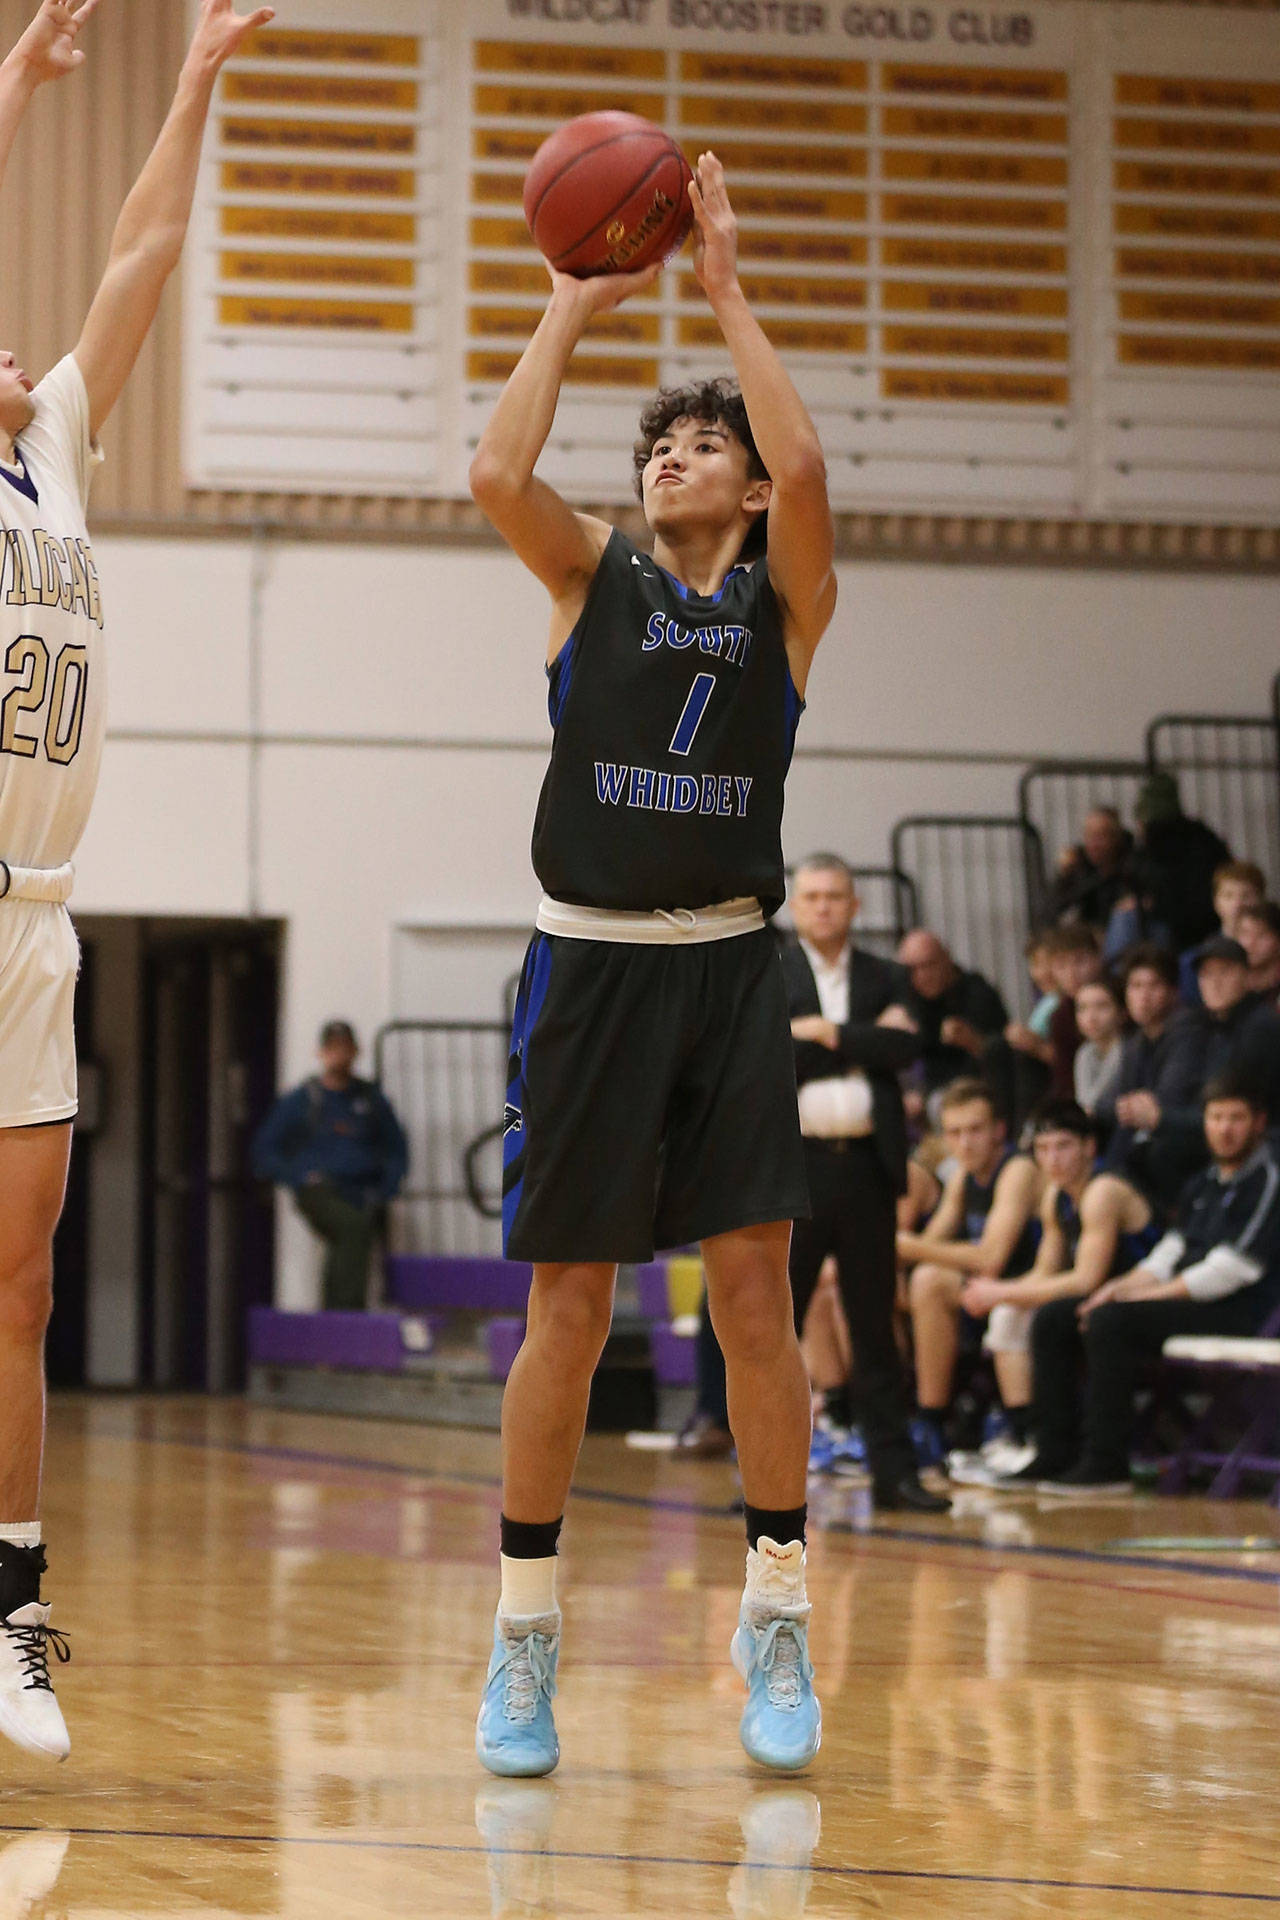 Jacob Ng launches a three-pointer for the Falcons.(Photo by John Fisken)